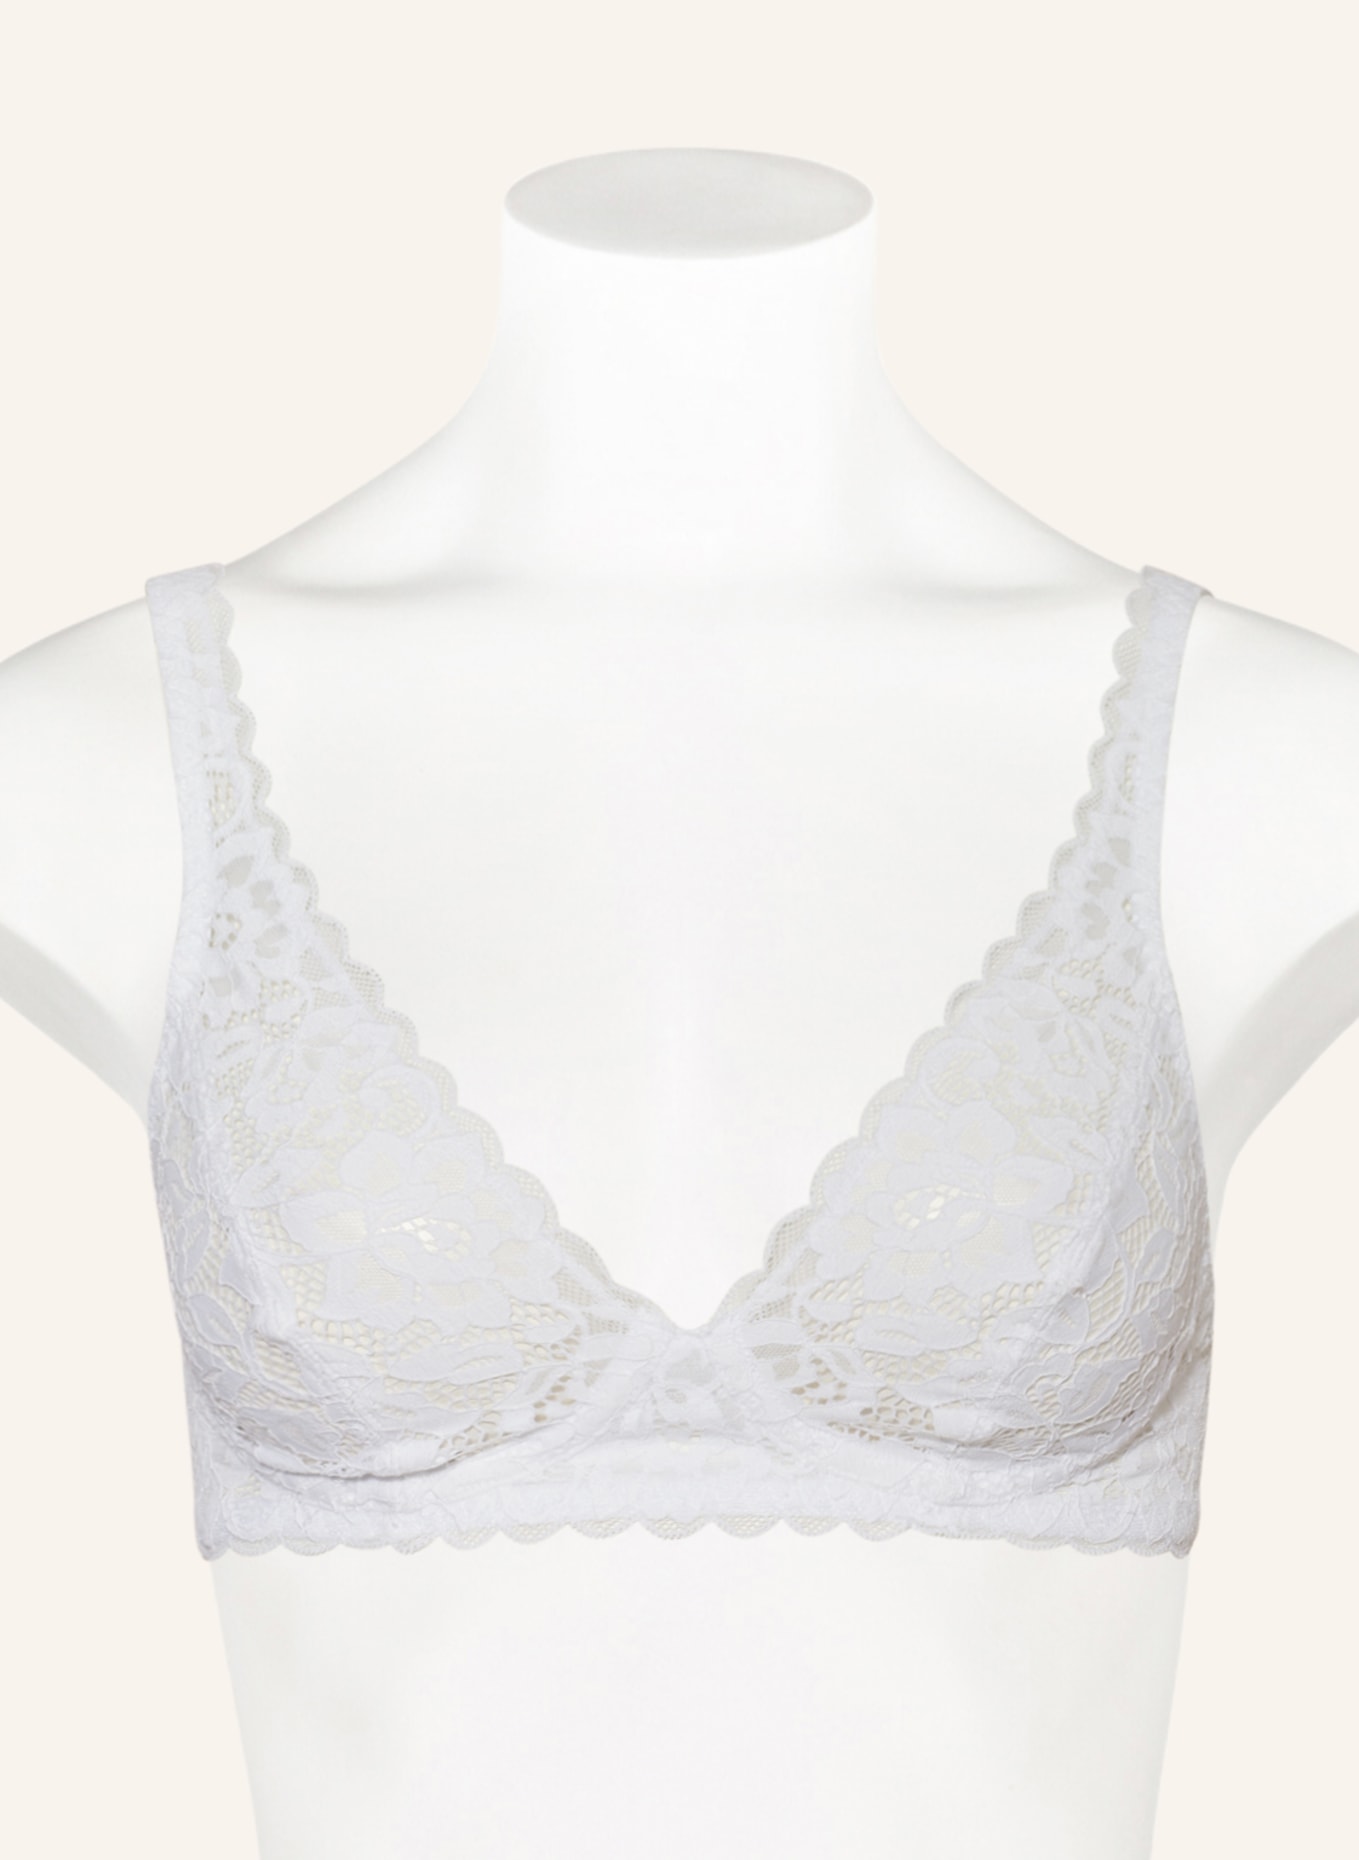 Women's Calida 04375 Natural Comfort Cotton Soft Cup Bra (White 32A)